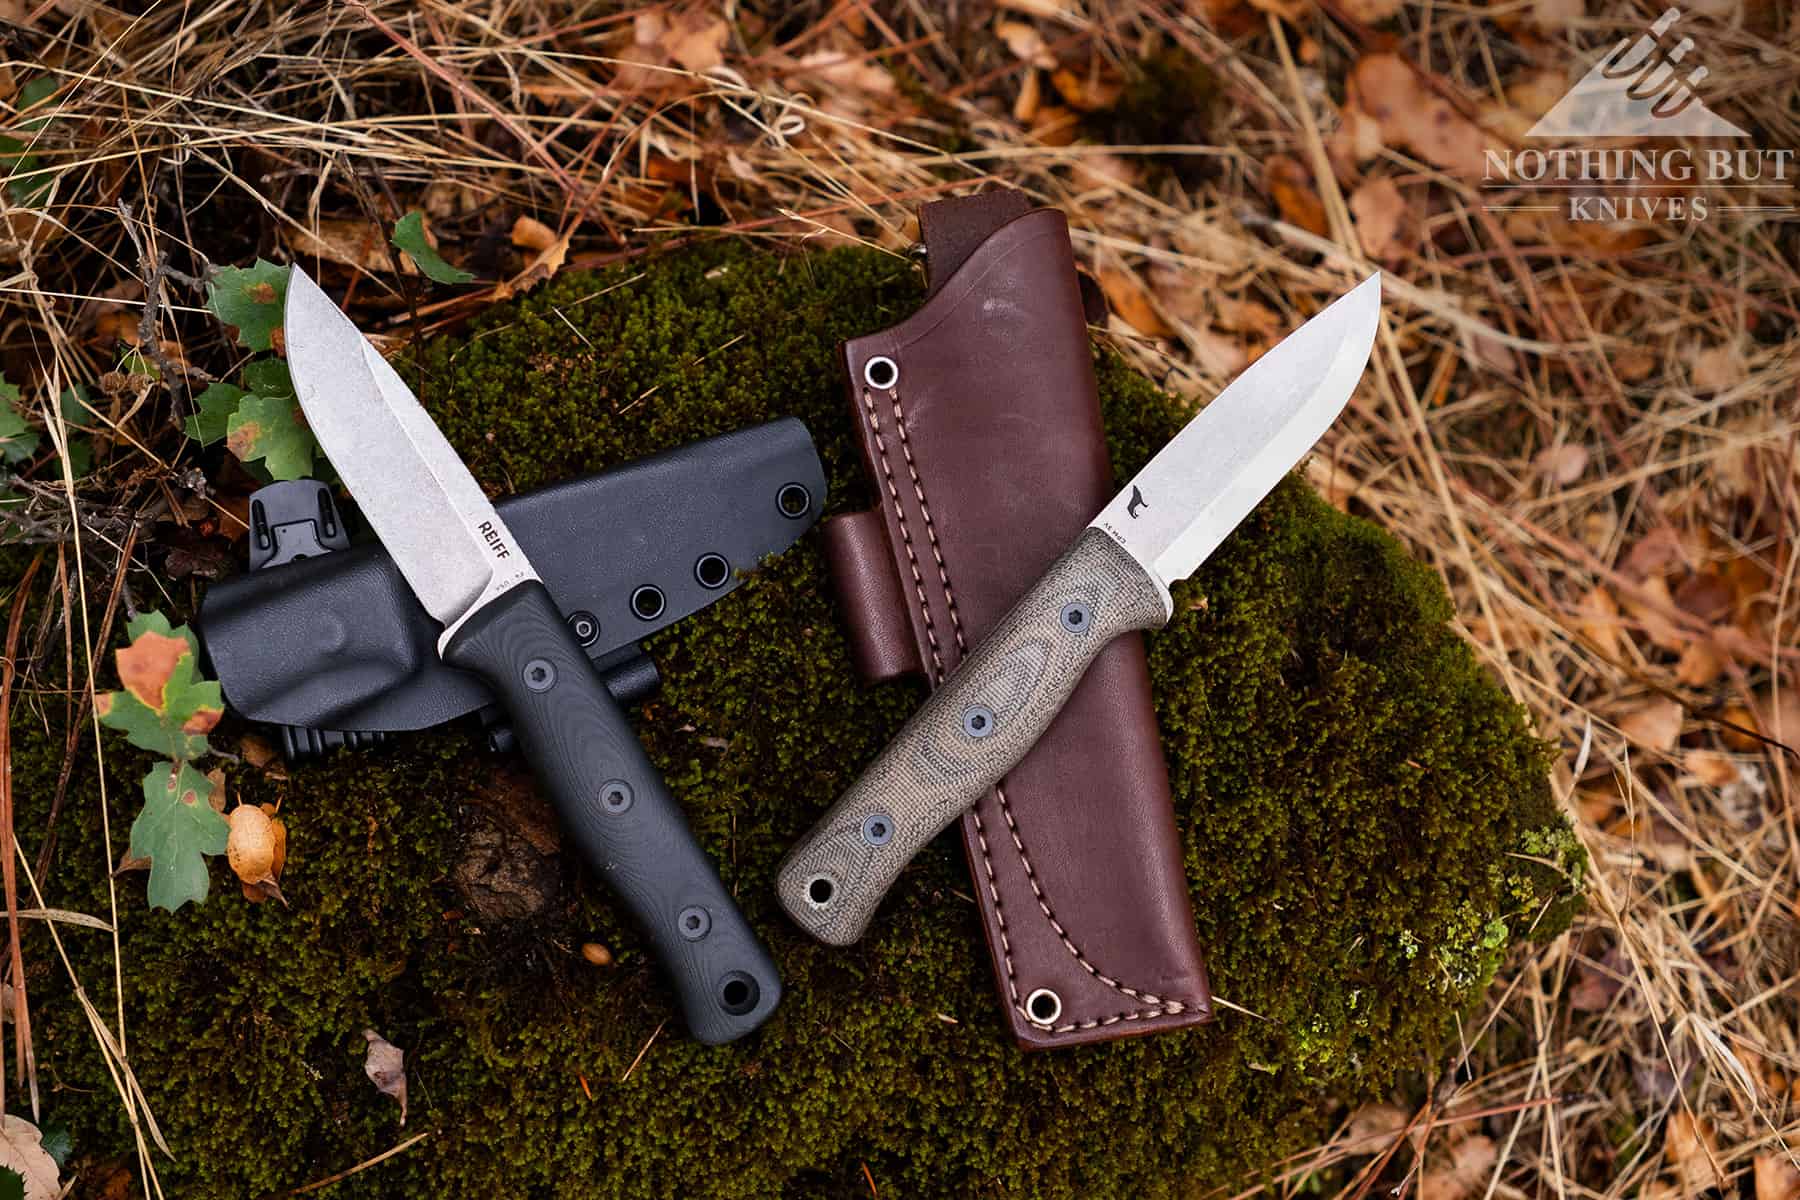 The Reiff F4 bushcraft knife iis available in a variety of handle scale or sheath options. 